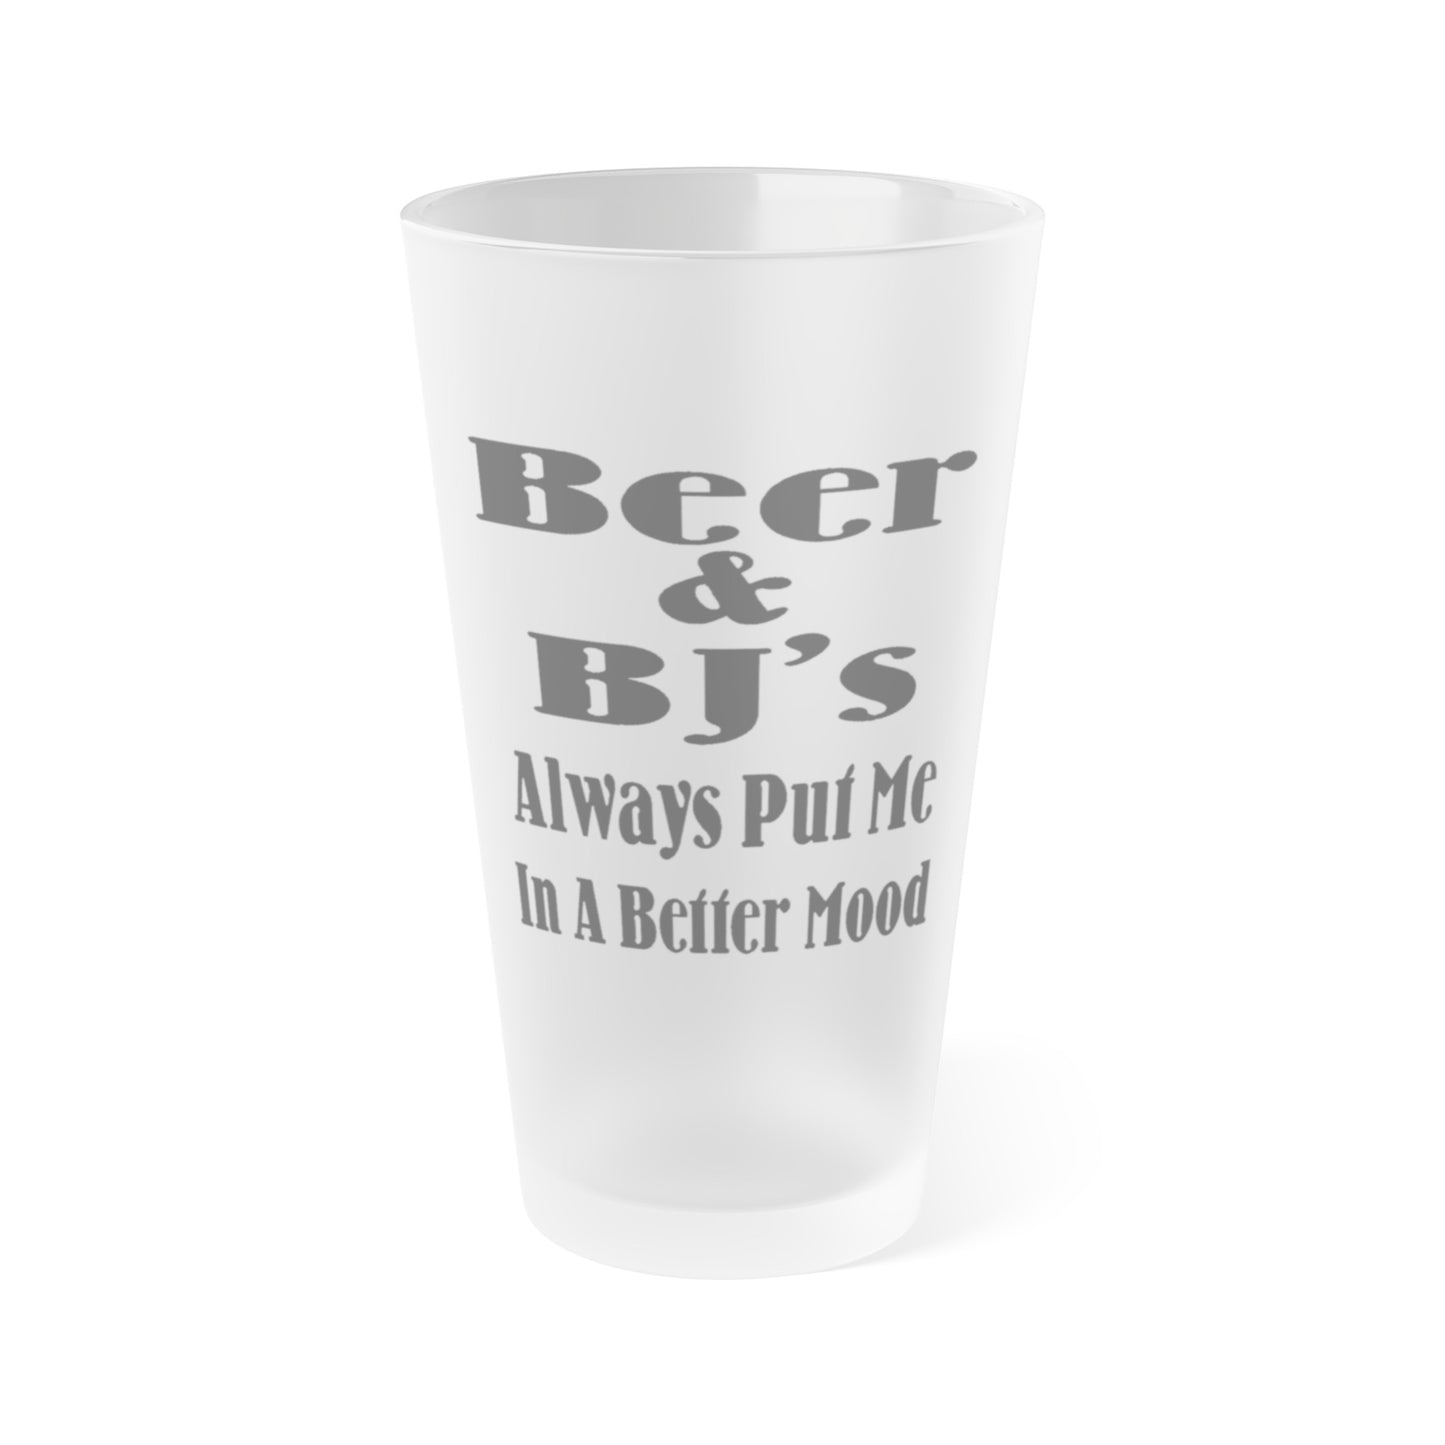 Beer and BJ's Always Put Me In A Better Mood - Frosted Pint Glass, 16oz